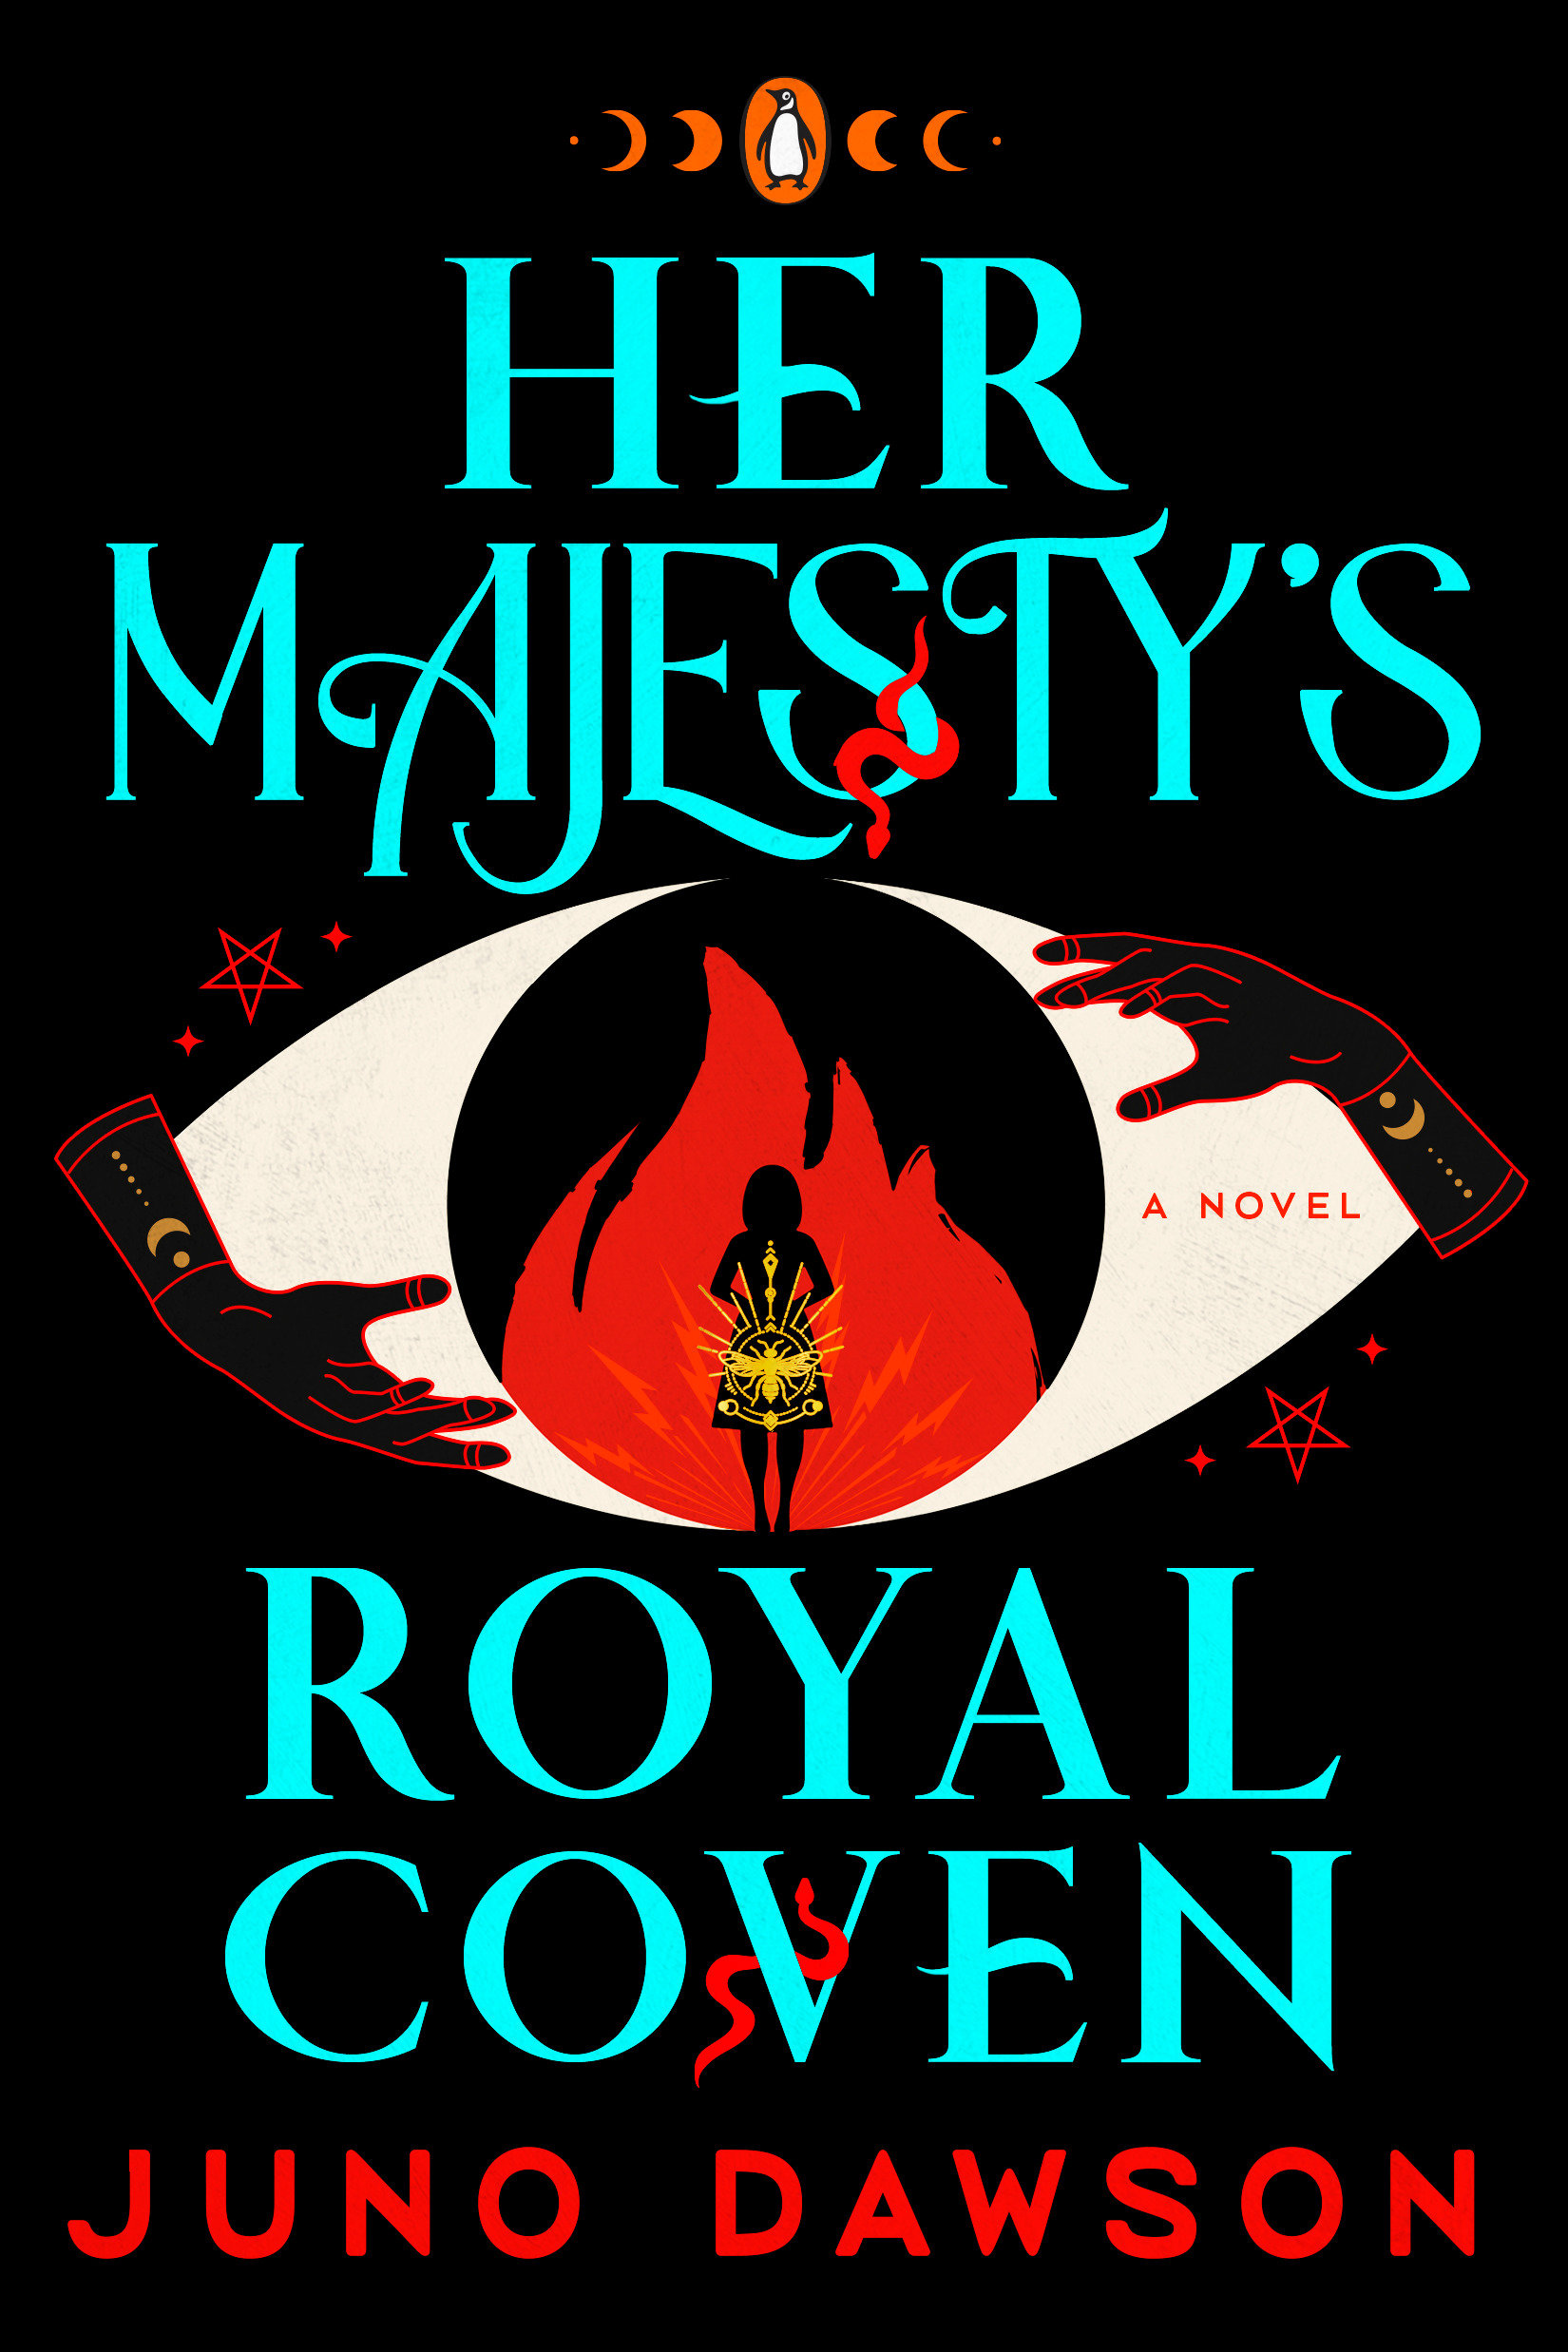 Her Majesty's Royal Coven cover image